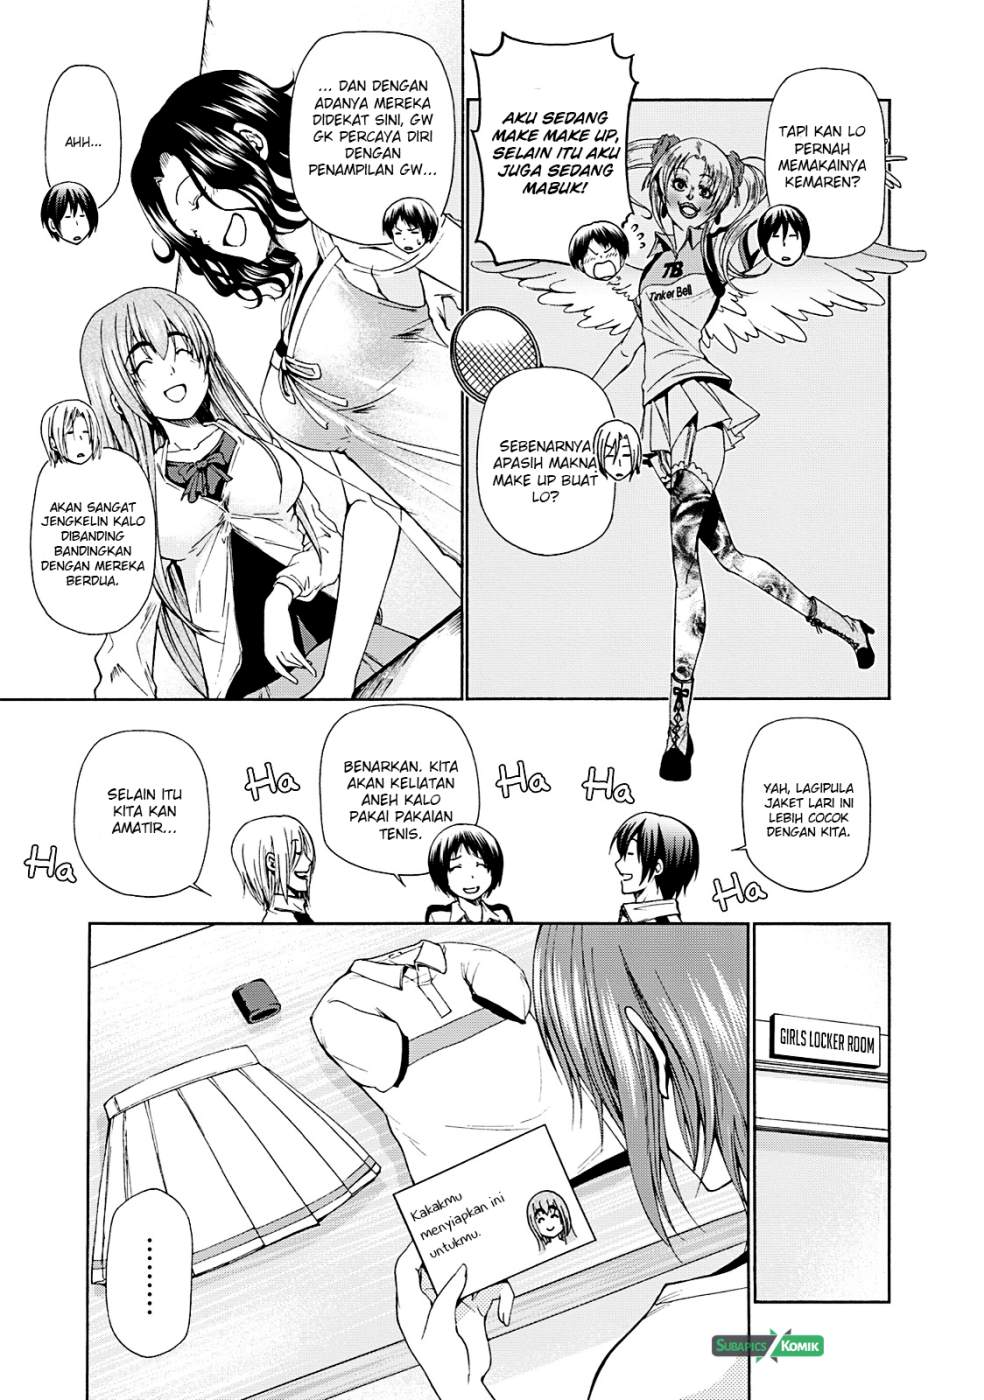 Grand Blue Chapter 12